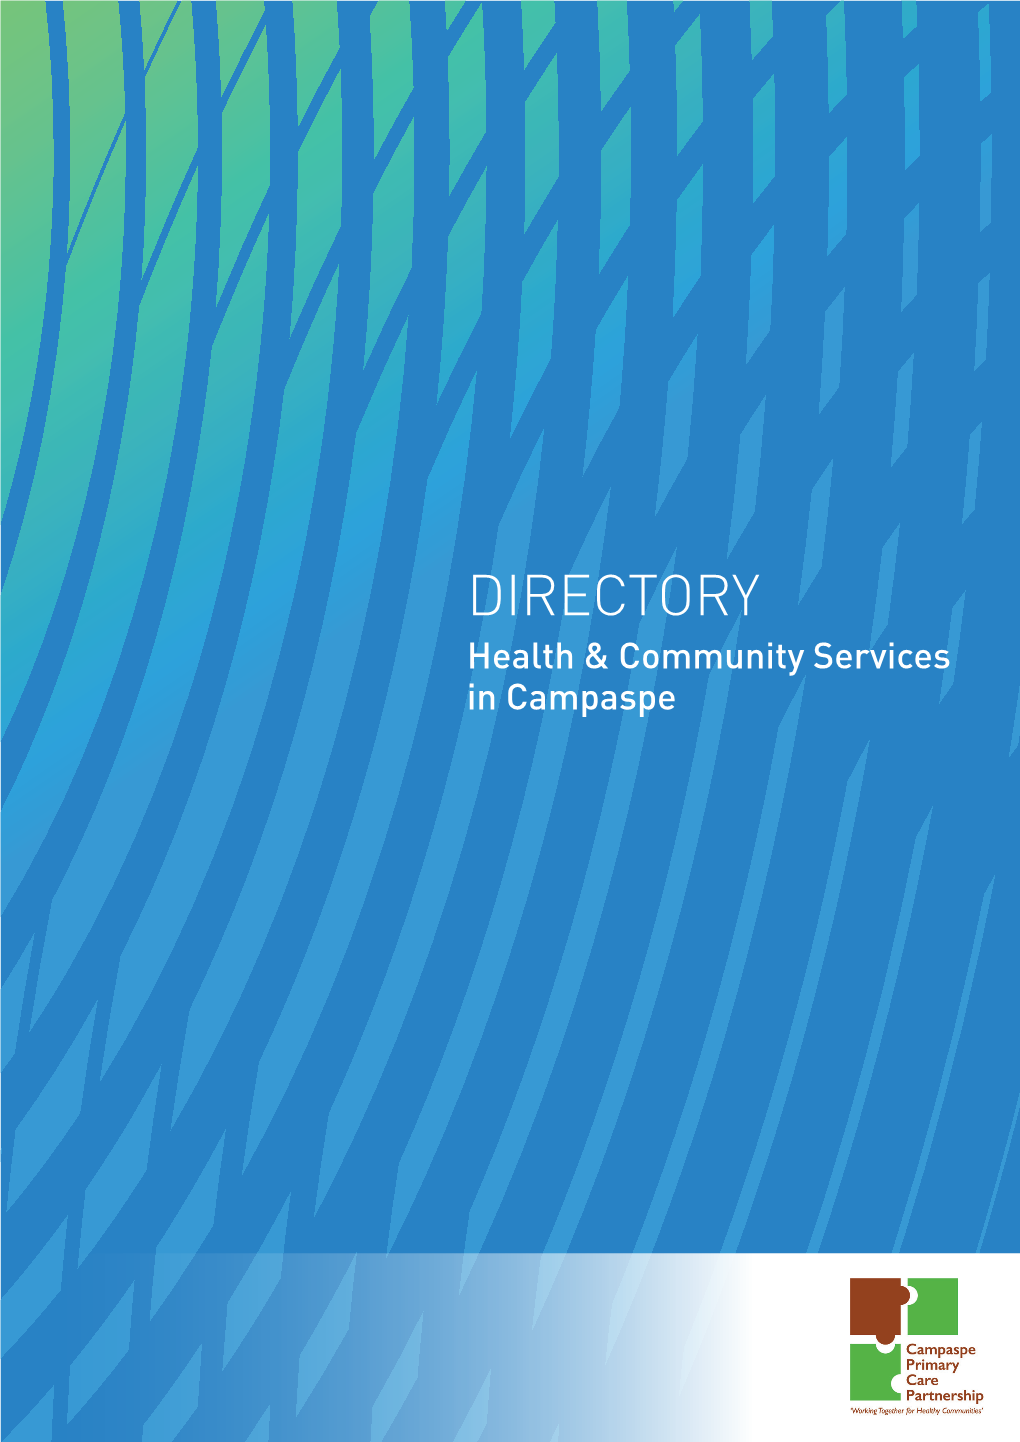 Directory Health & Community Services in Campaspe